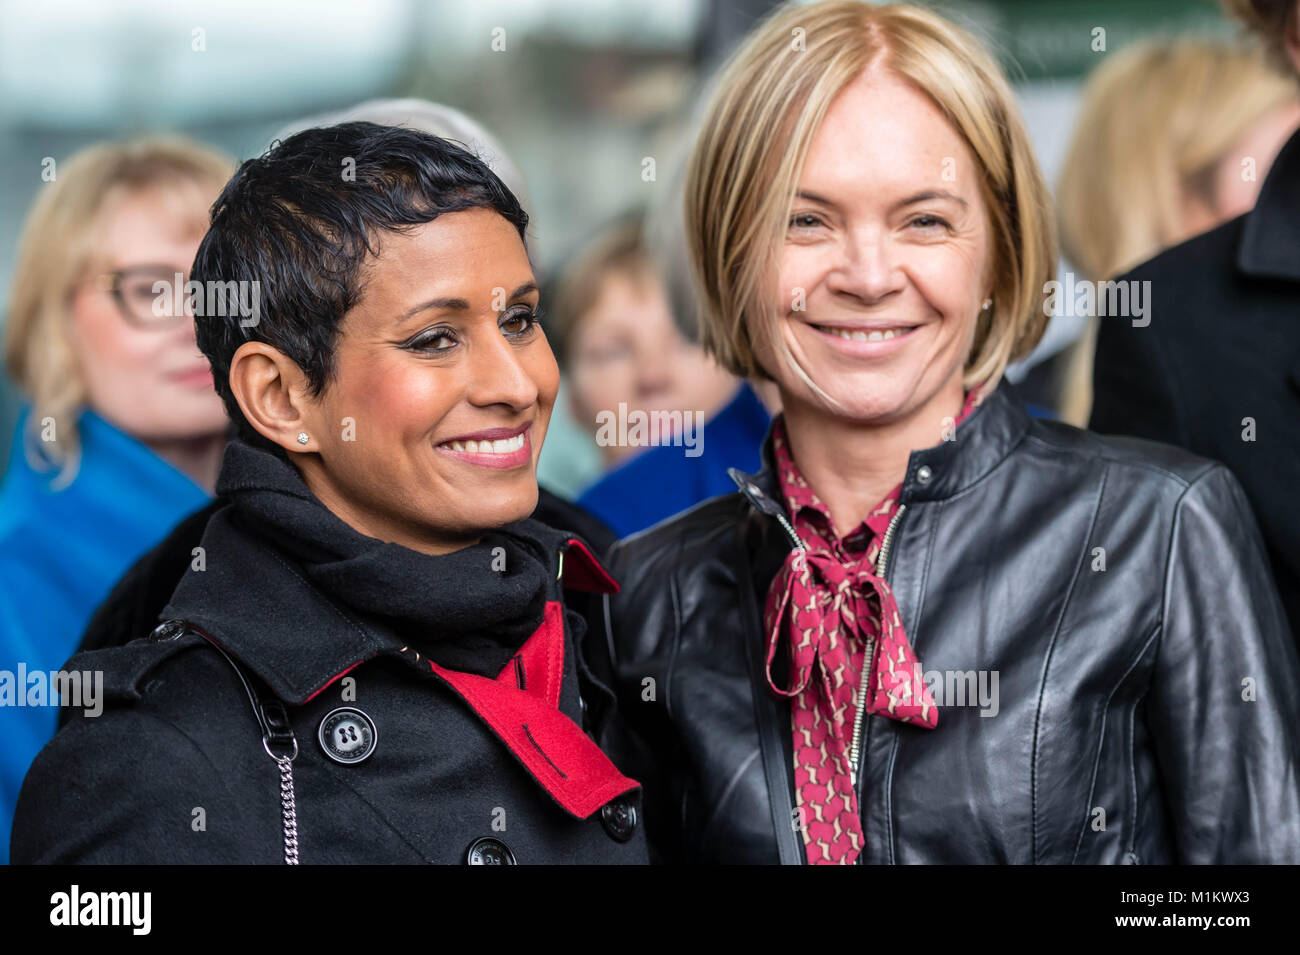 London, UK. 31st January 2018.  Female BBC presenters and staff arrive at the Select committee hearing on S BBC pay.  Pictured Mariella Frostrup, BBC news presenter, center and Naga Munchetty (left)  Credit Ian Davidson/Alamy Live News Stock Photo